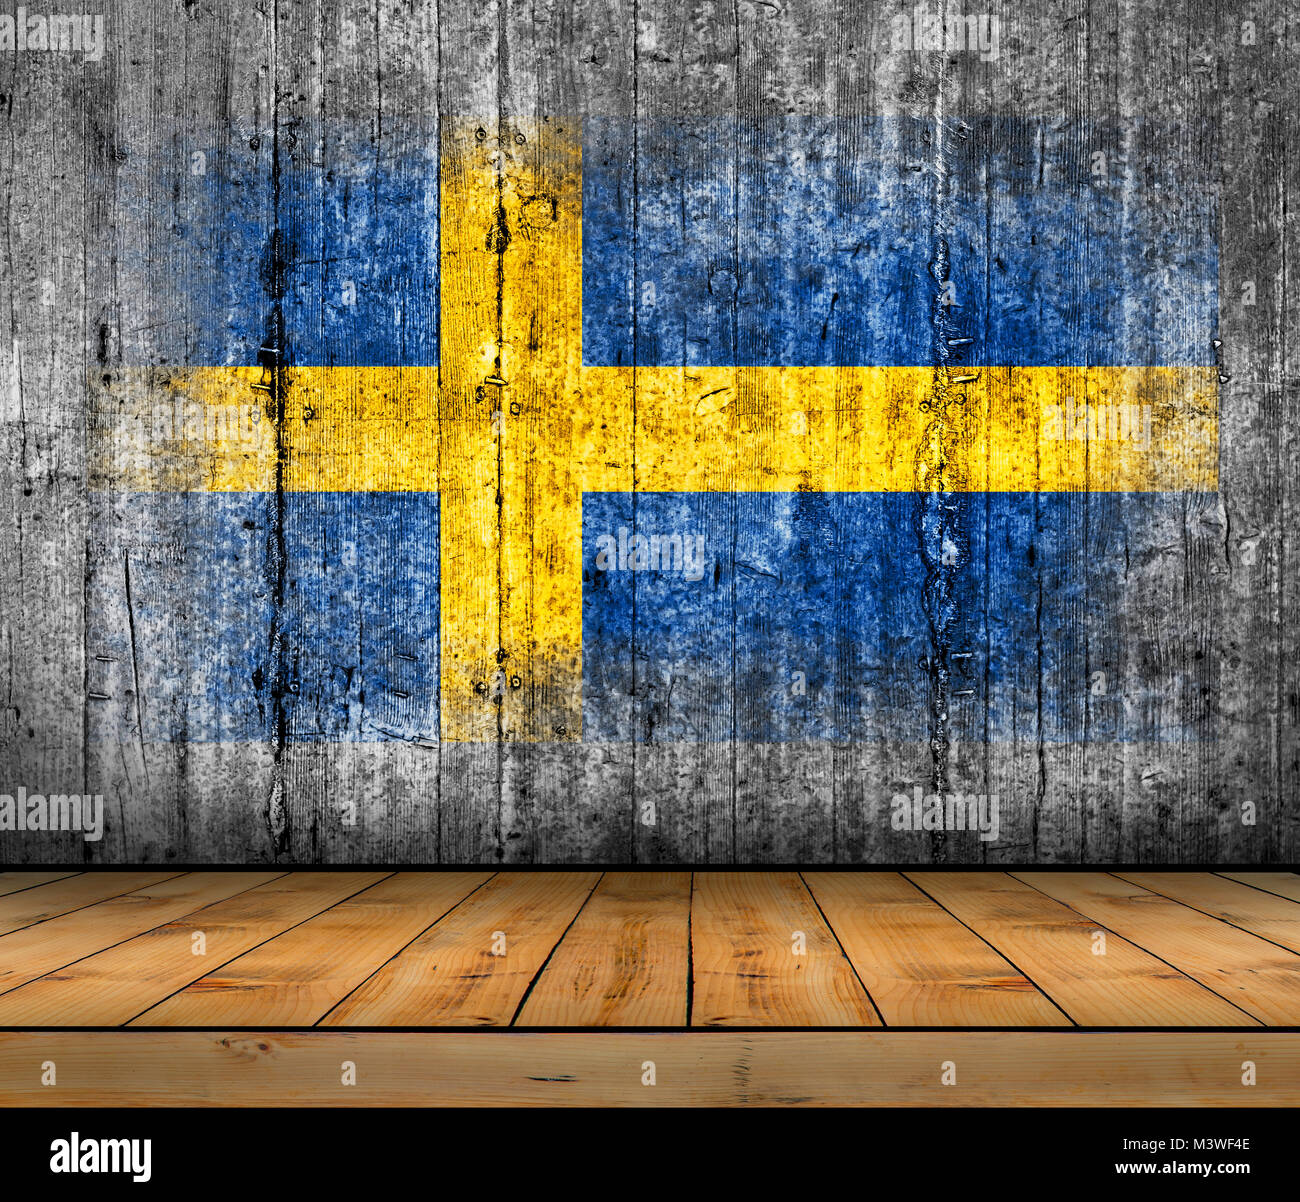 Sweden flag painted on concrete with wooden floor Stock Photo